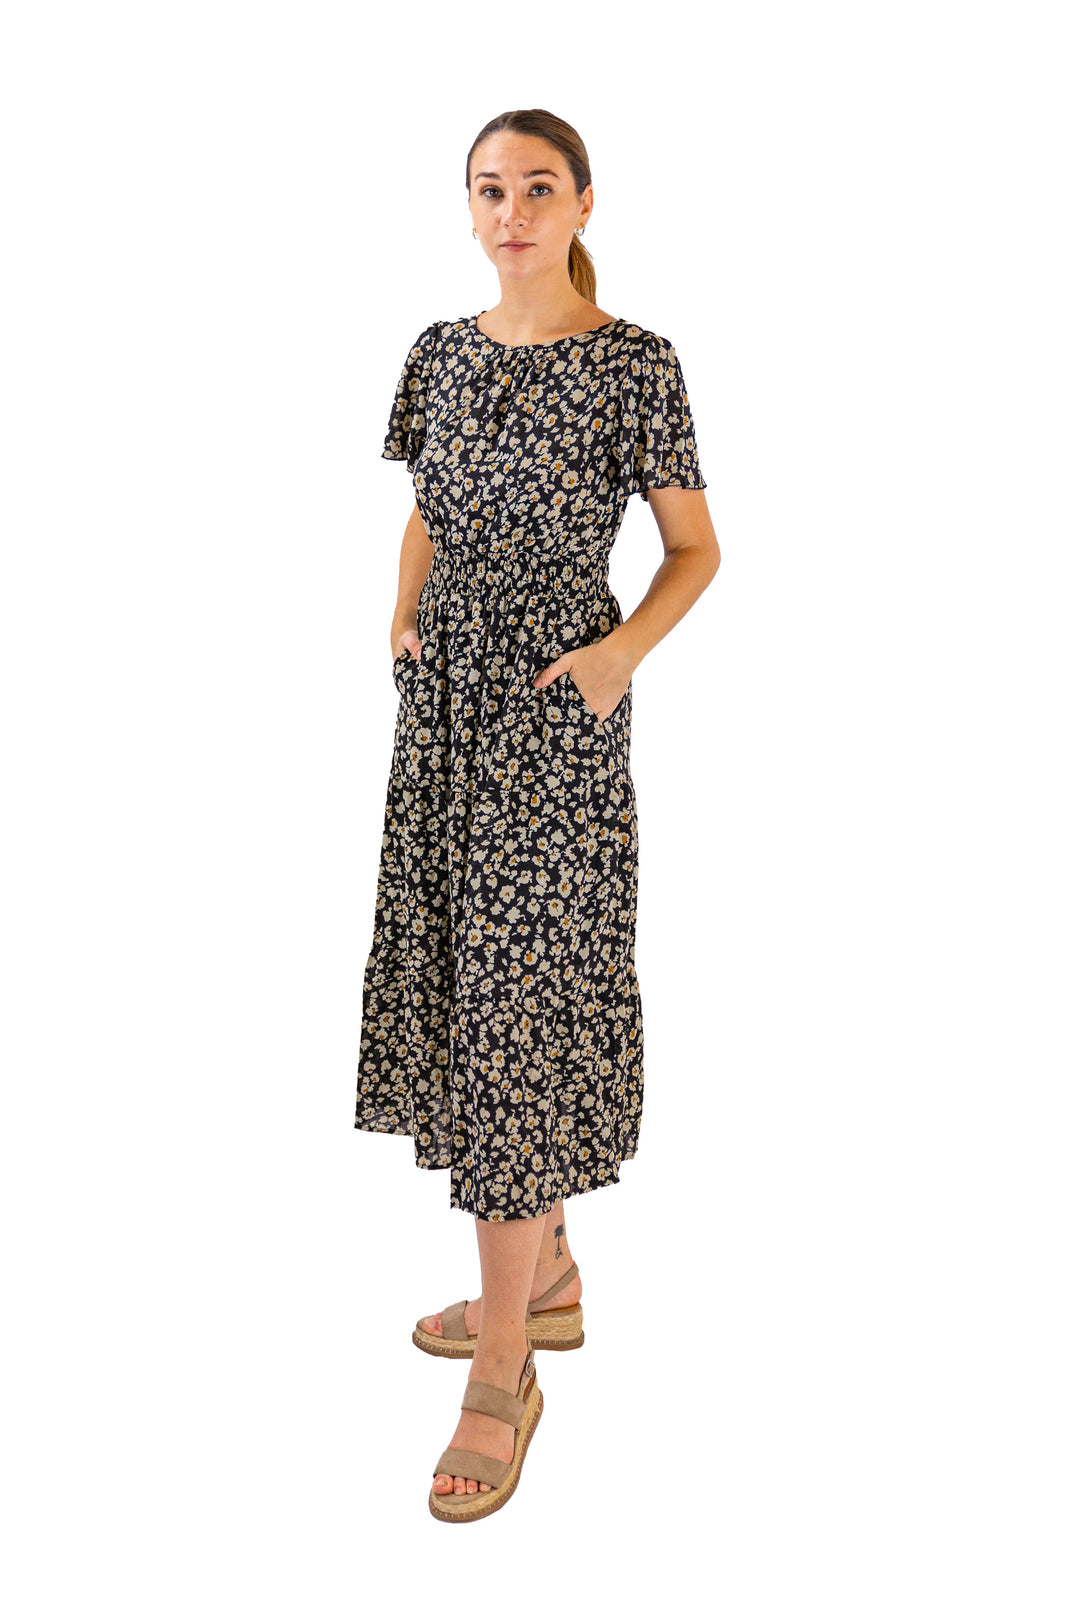 Fabonics Chic Black Floral Midi Dress with Monochrome Design and Ruffled Sleeves